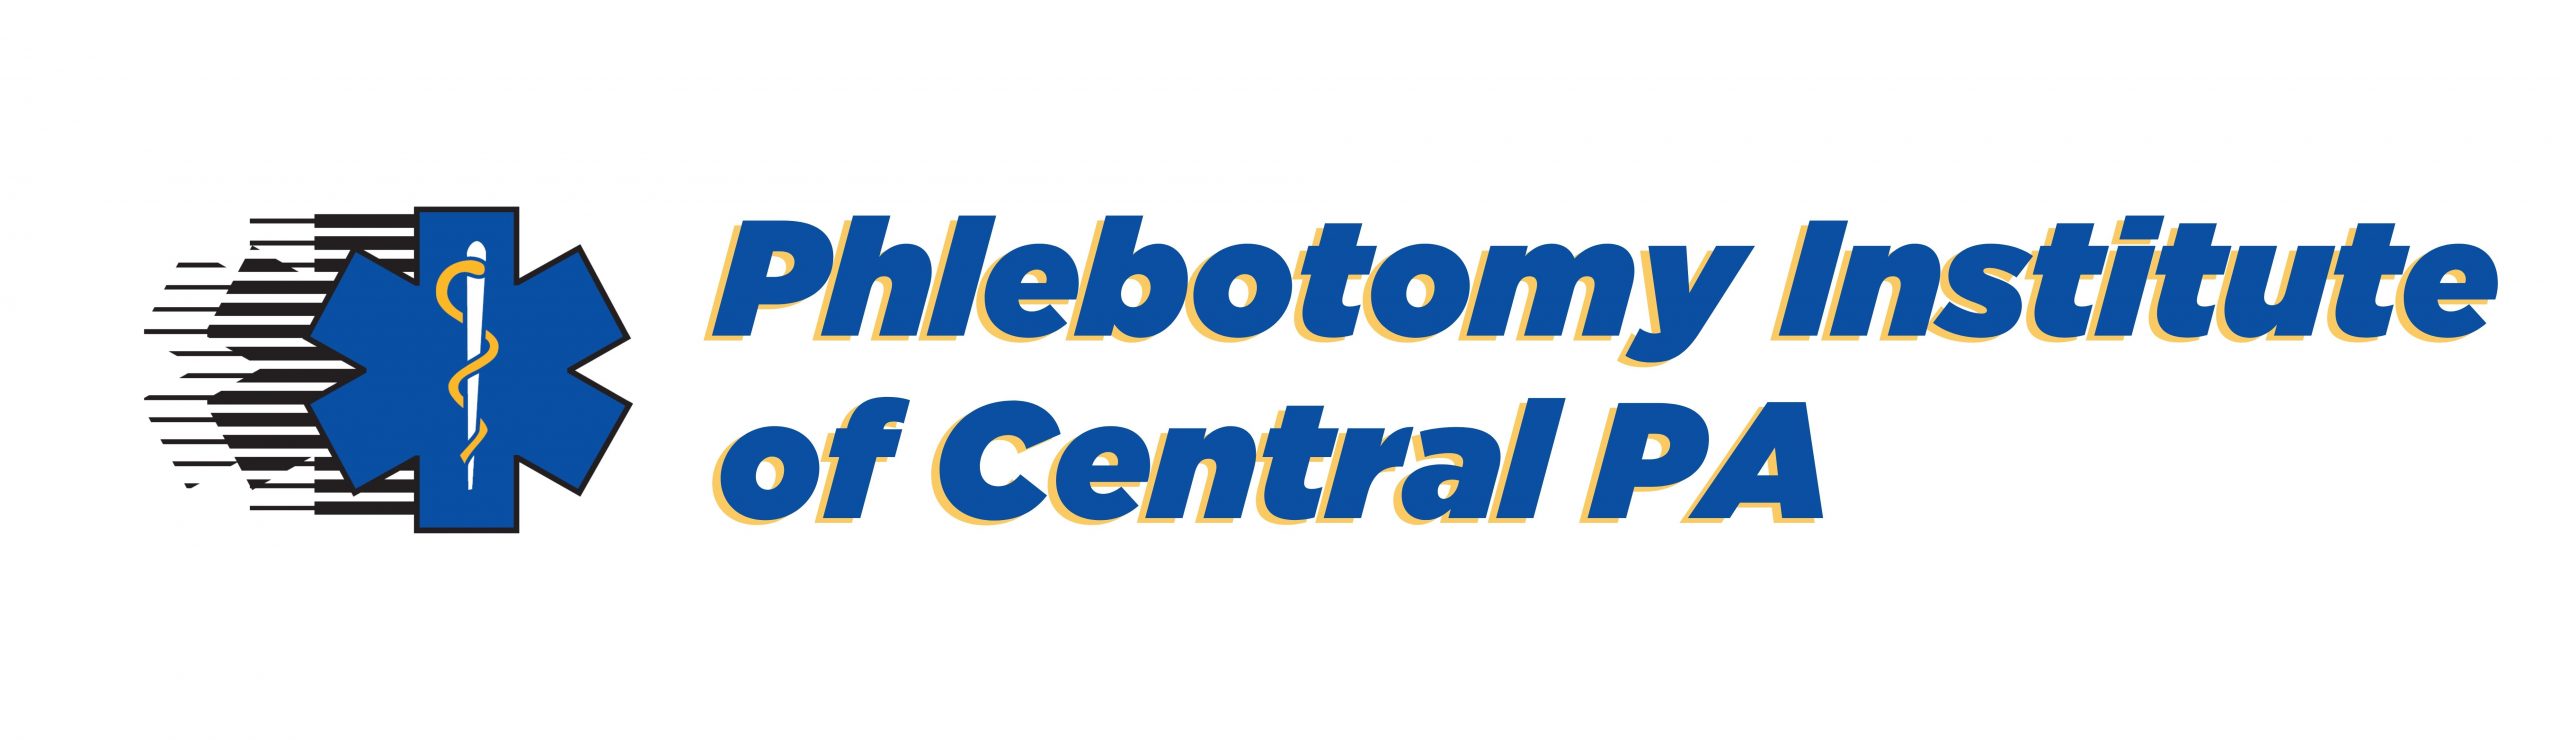 Phlebotomy Institute of Central PA